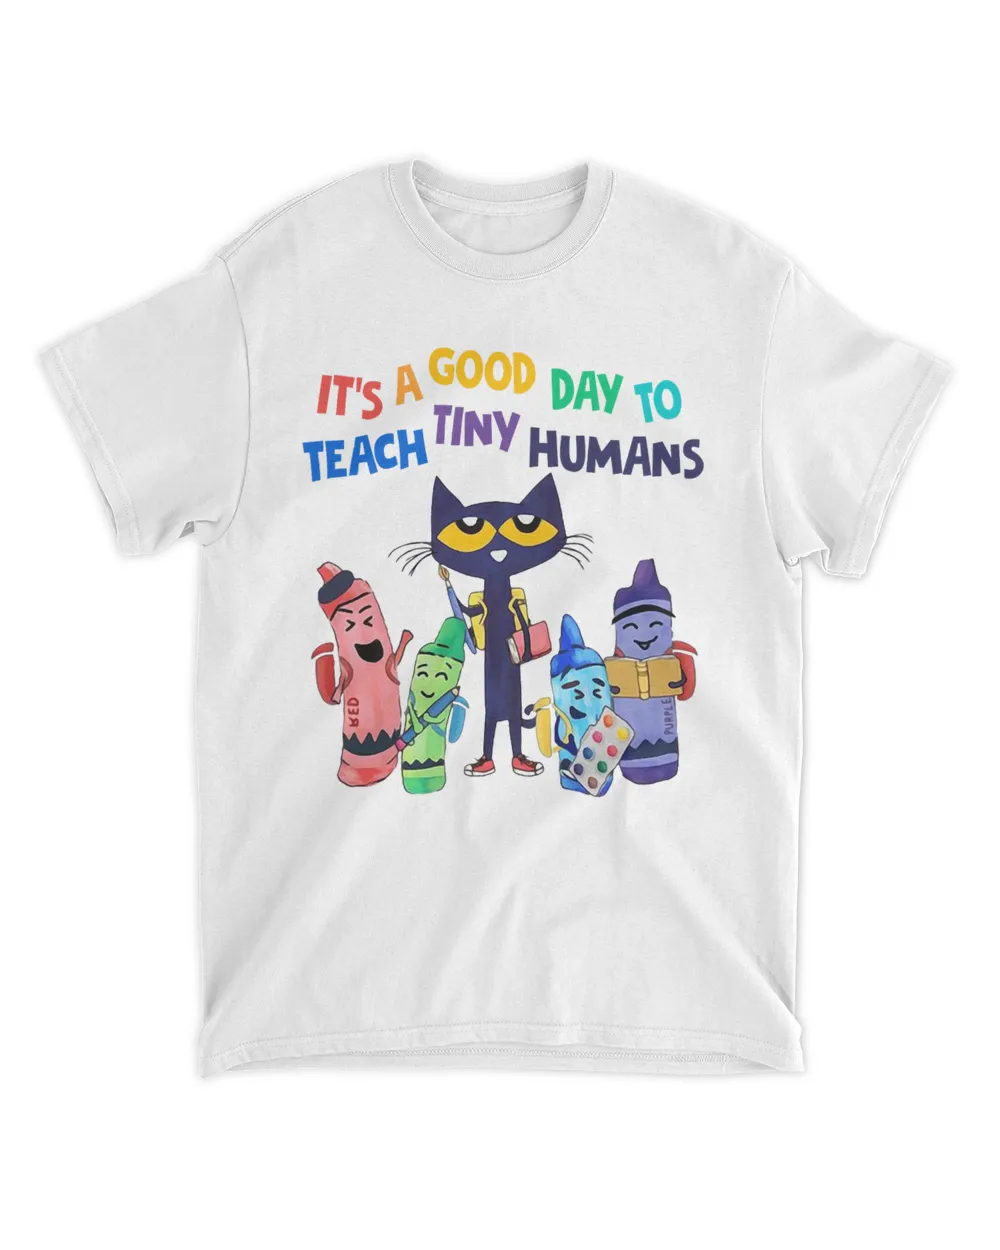 Pete the cat - It's a good day to teach tiny human